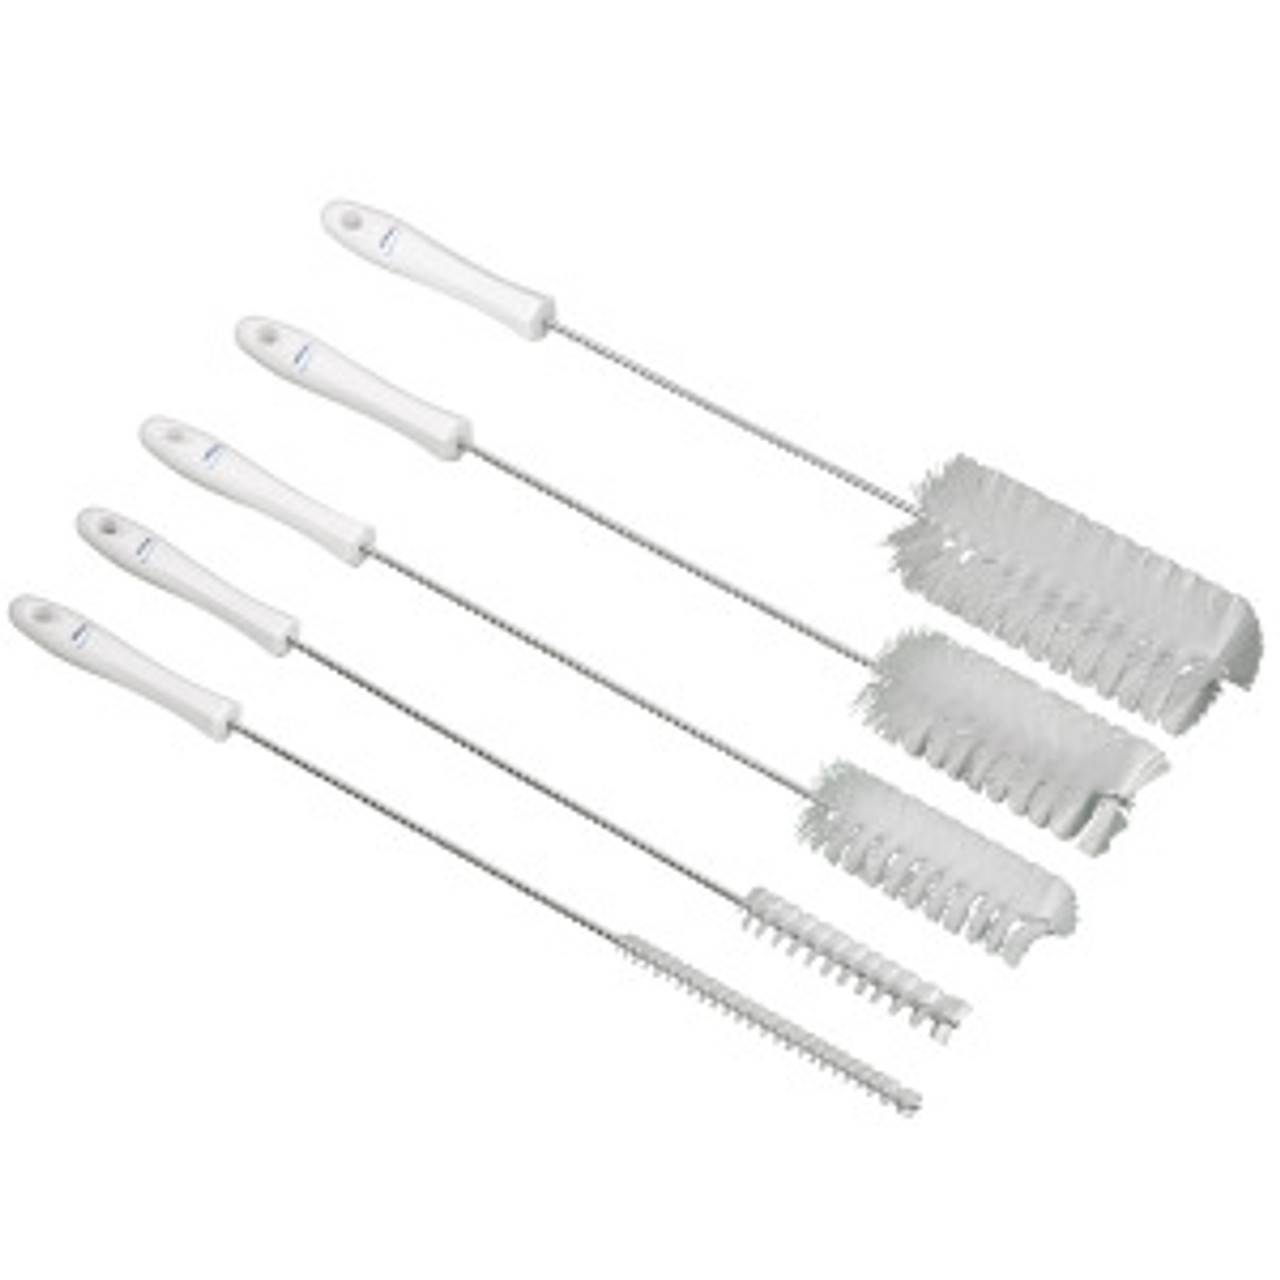 Neilsen Hole Cleaning Kit Set Air Tools Pipe Tube Cleaning Brush Brushes  6pc